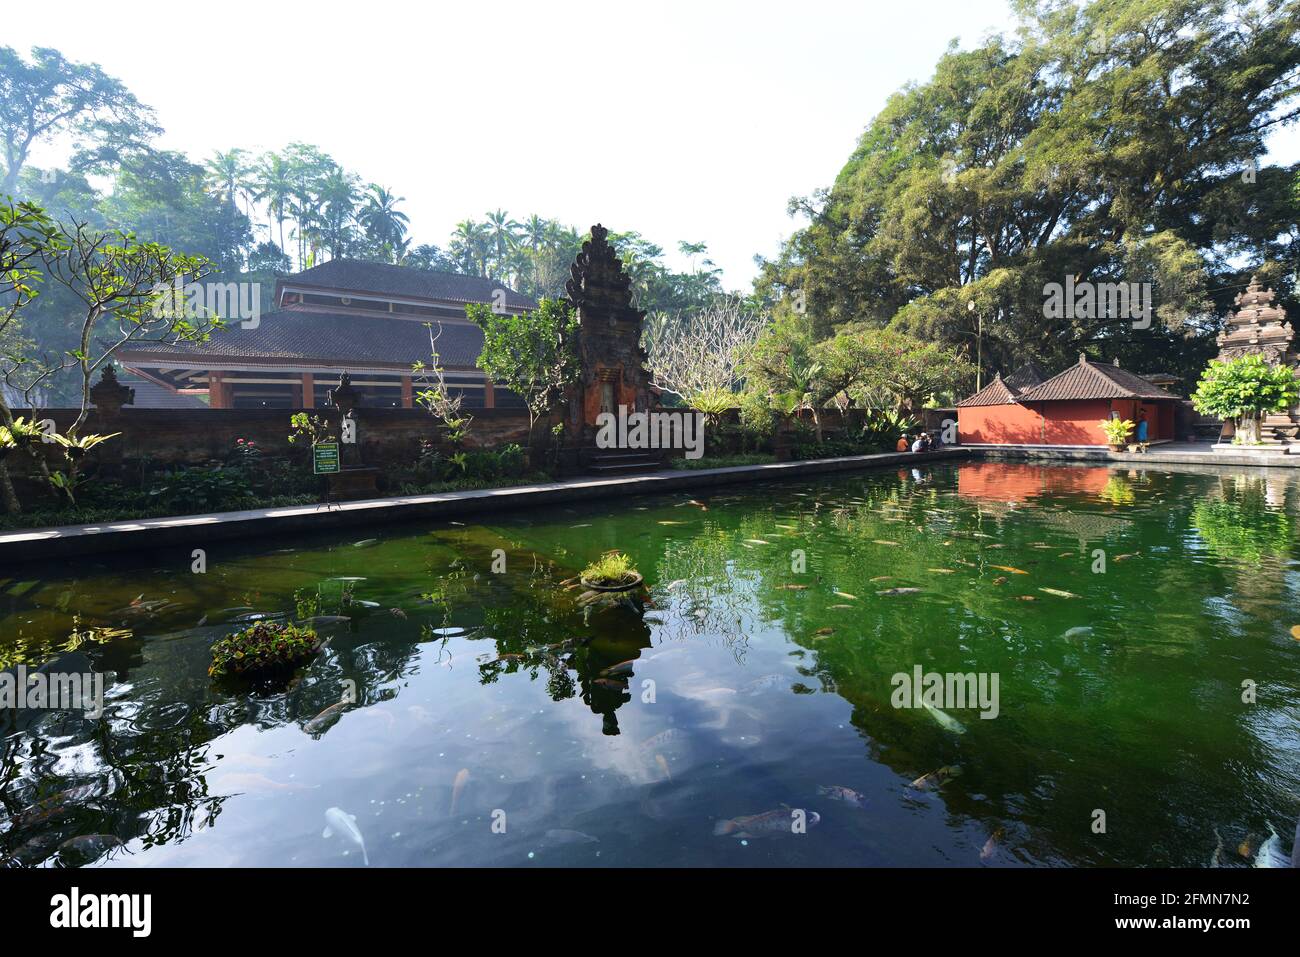 Koi fish in a pond inside the Tirta Empul temple in Bali, Indonesia. Stock Photo